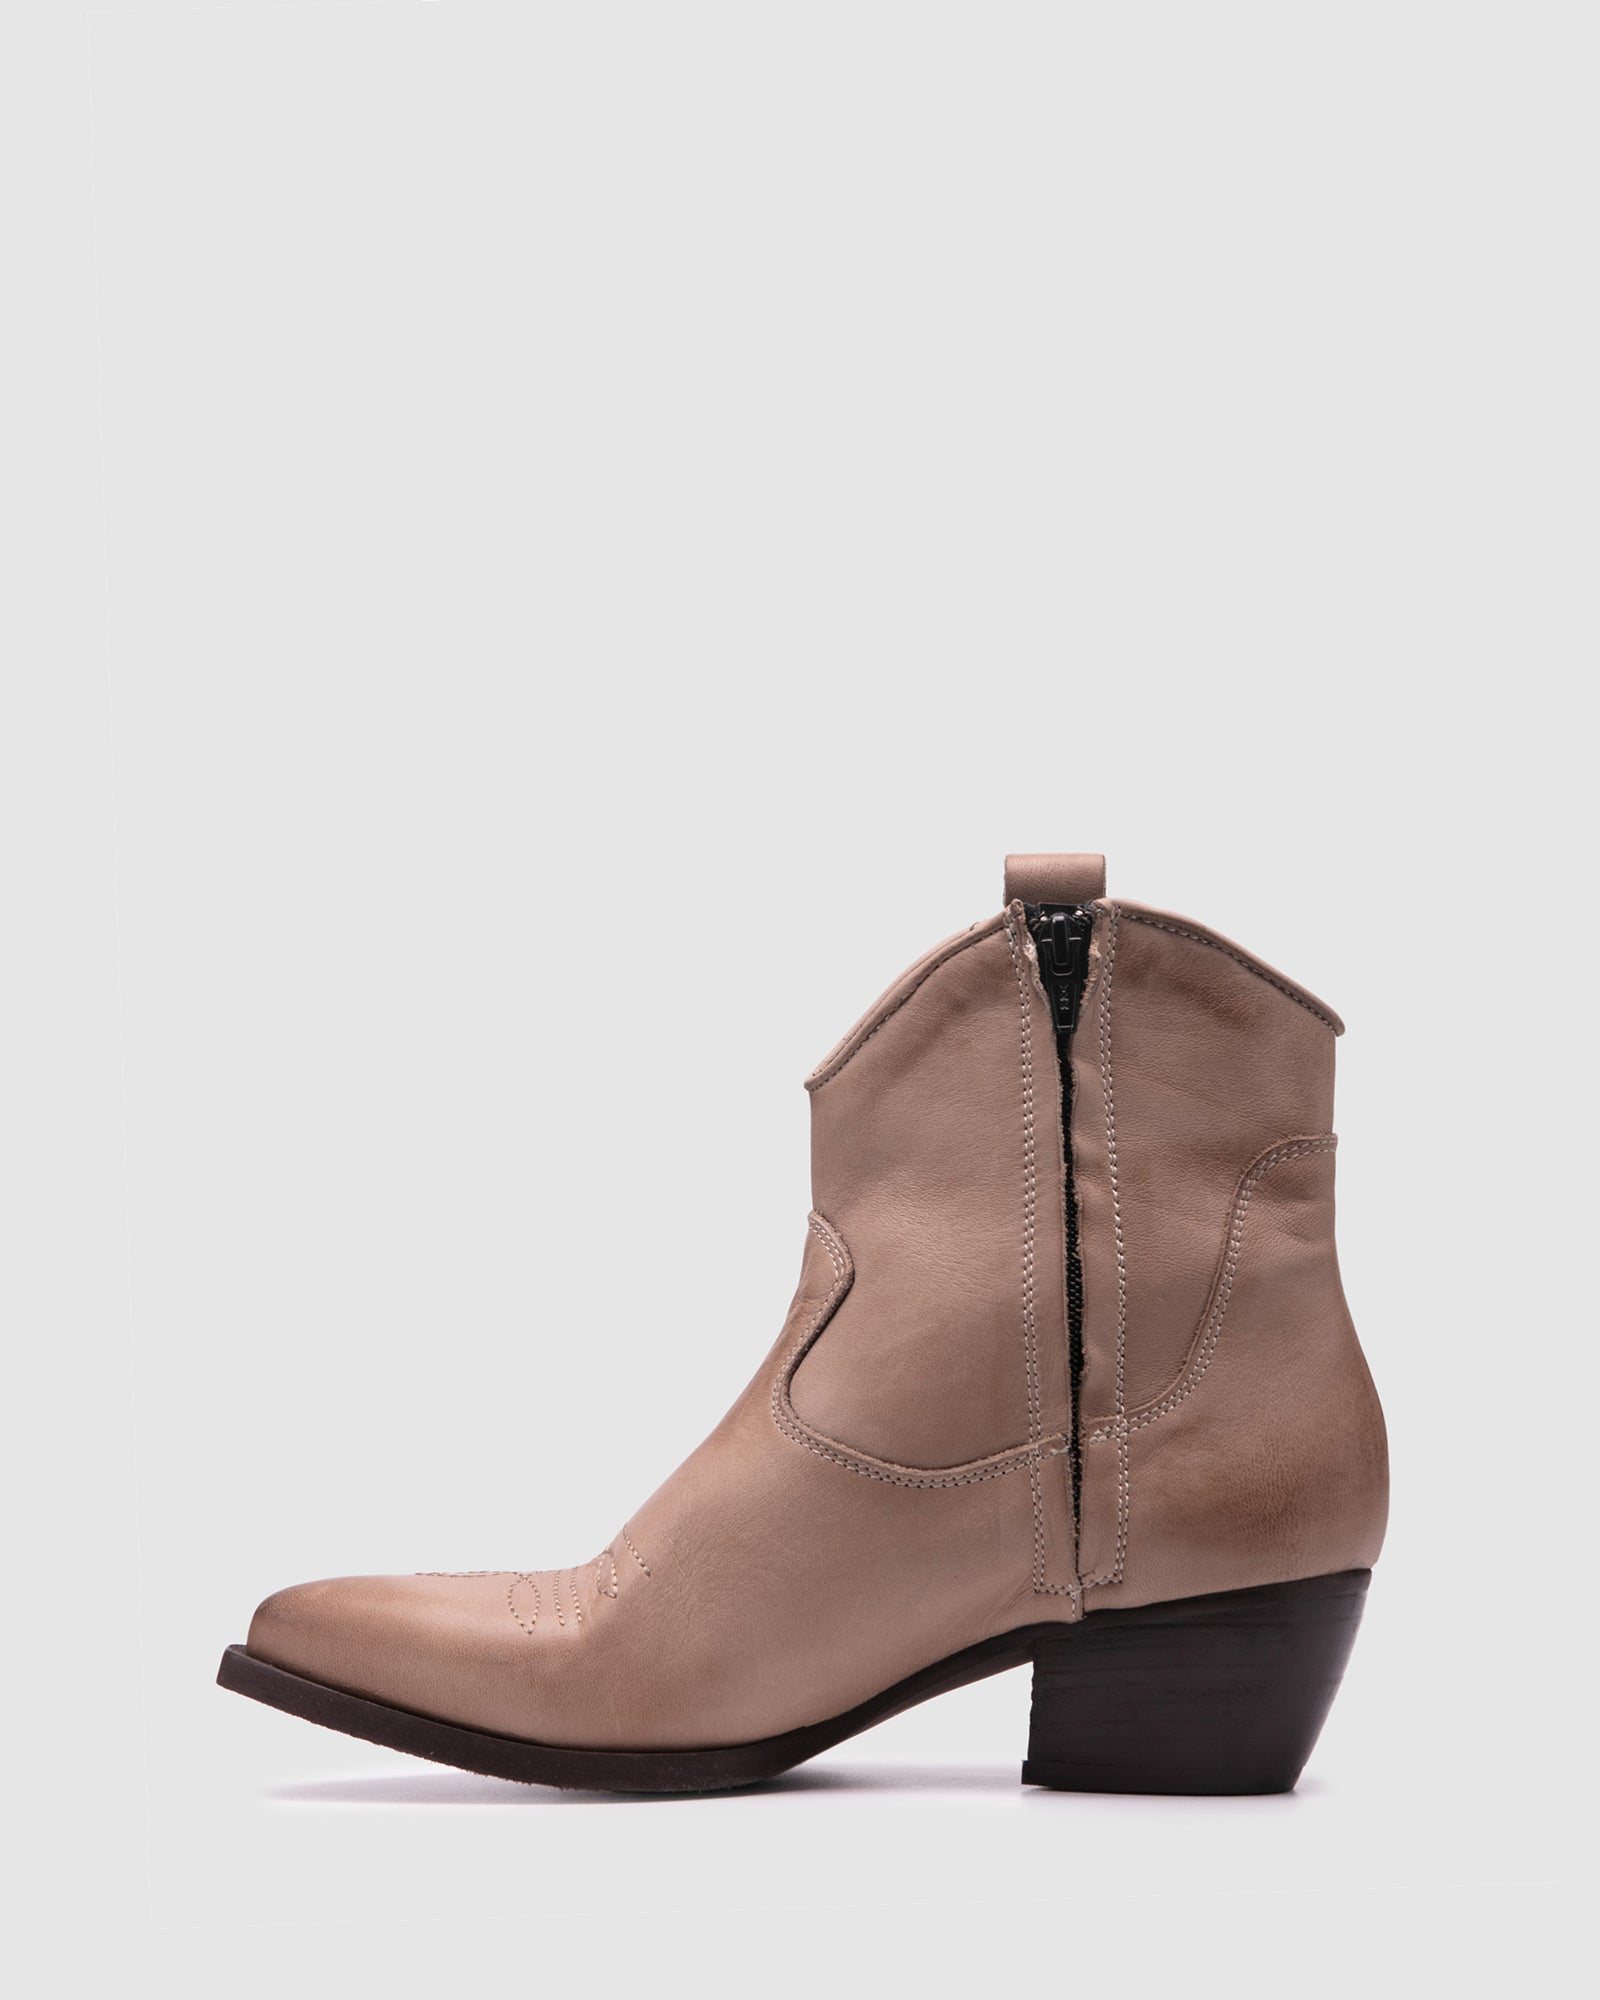 mainland boot - taupe